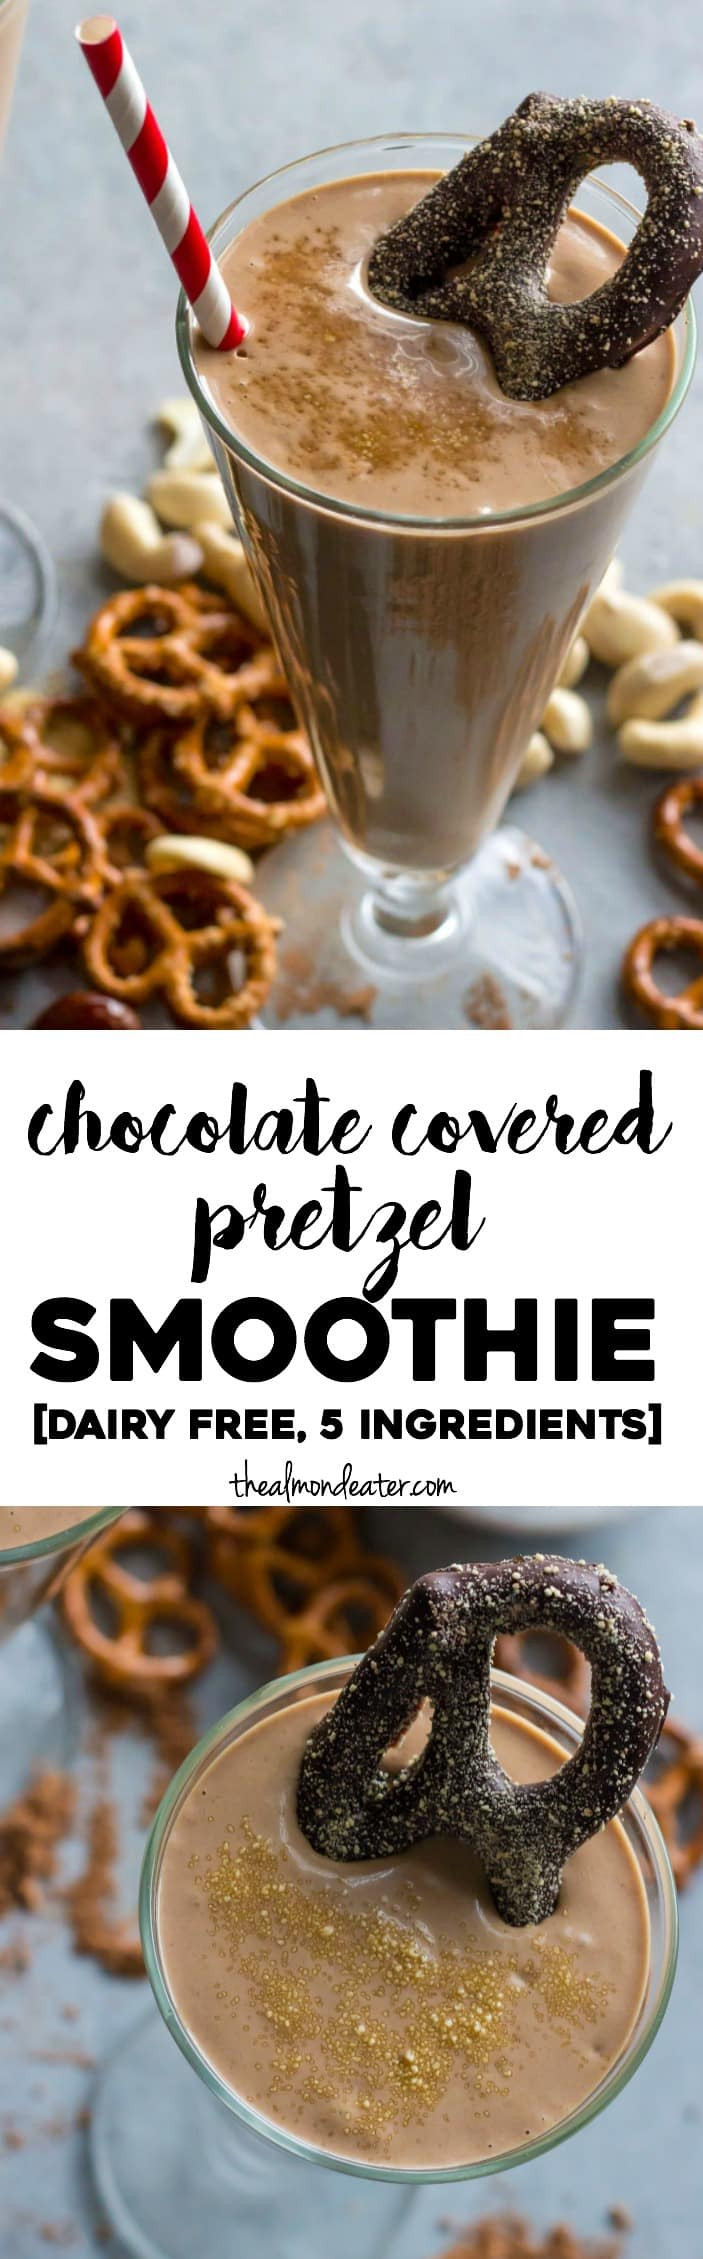 Healthy Chocolate Covered Pretzels
 Chocolate Covered Pretzel Smoothie